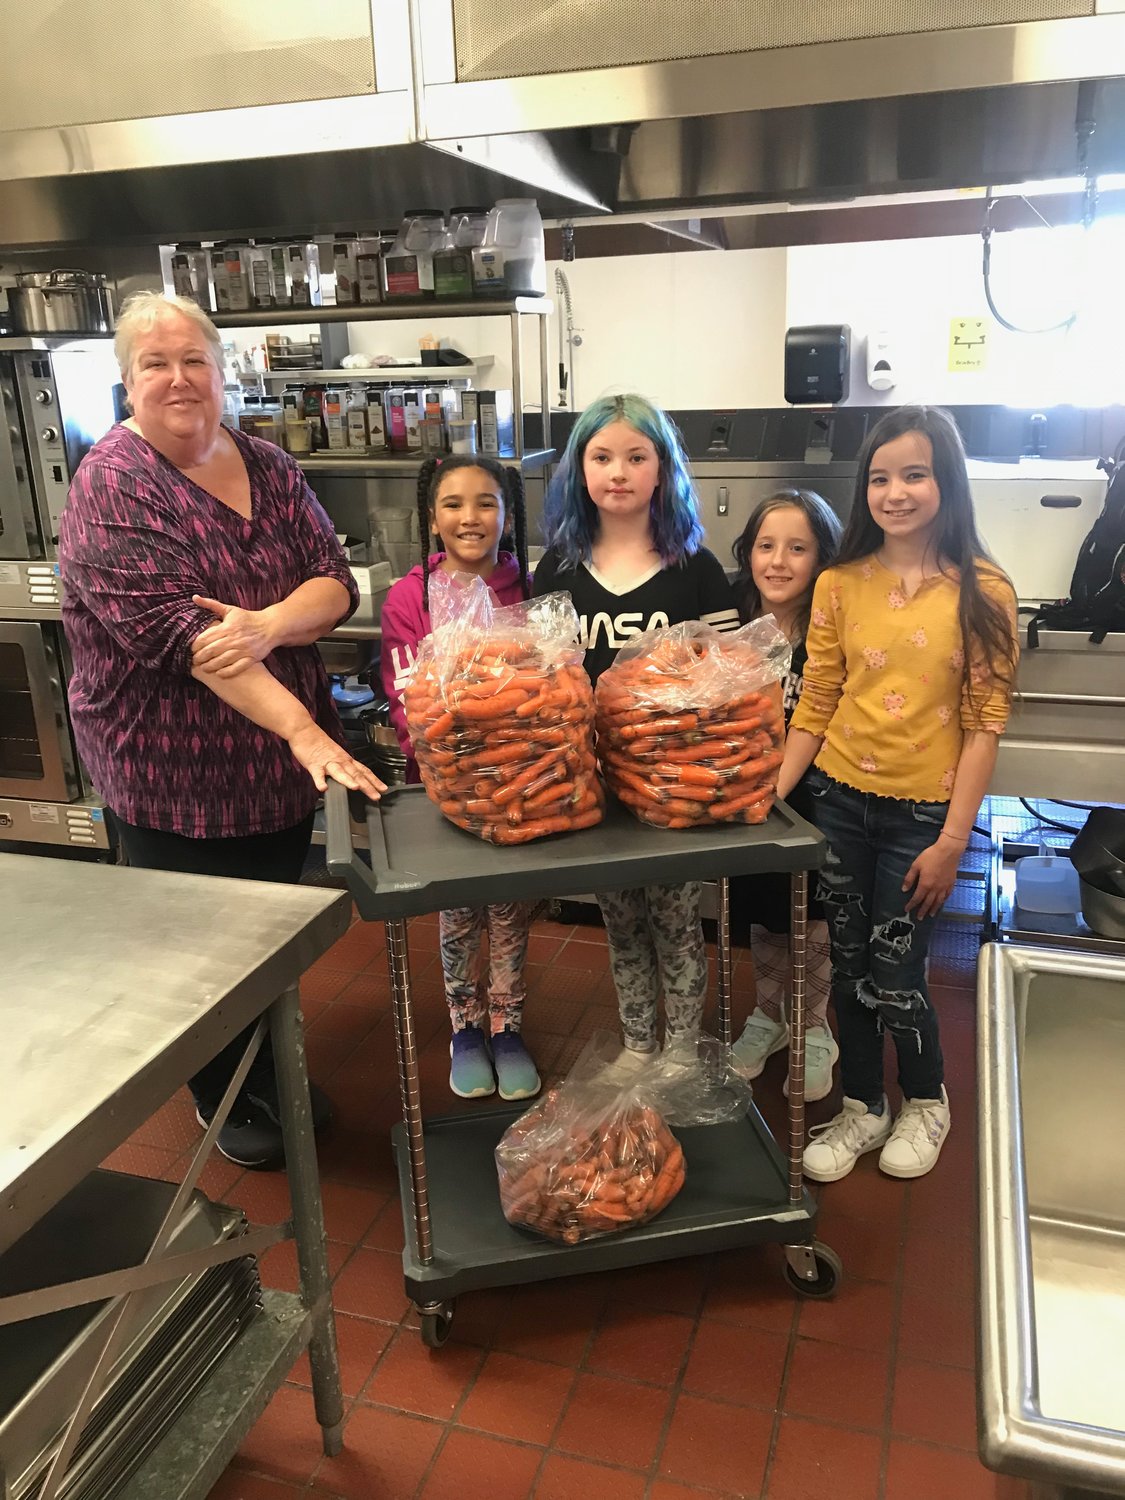 Carrot Delivery: Fourth-graders from Chimacum Elementary deliver a load of school-grown carrots to Food Service Director Margaret Garrett for use in school meals. Photo courtesy of Chimacum Elementary School.